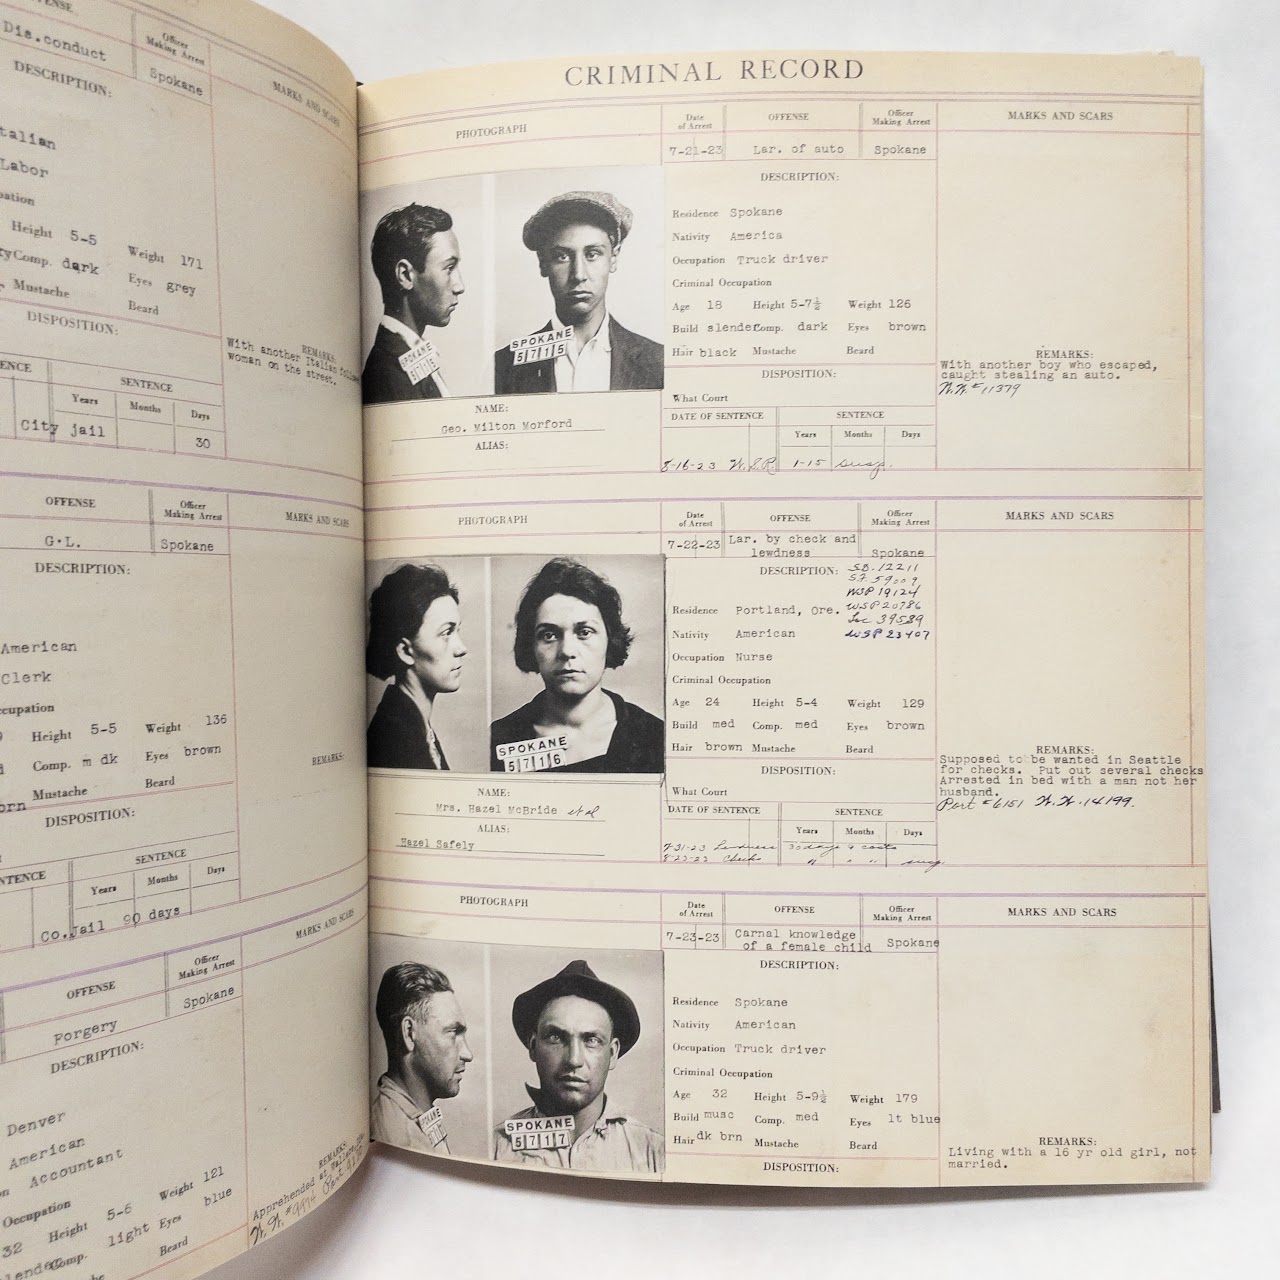 Least Wanted: A Century Of American Mugshots